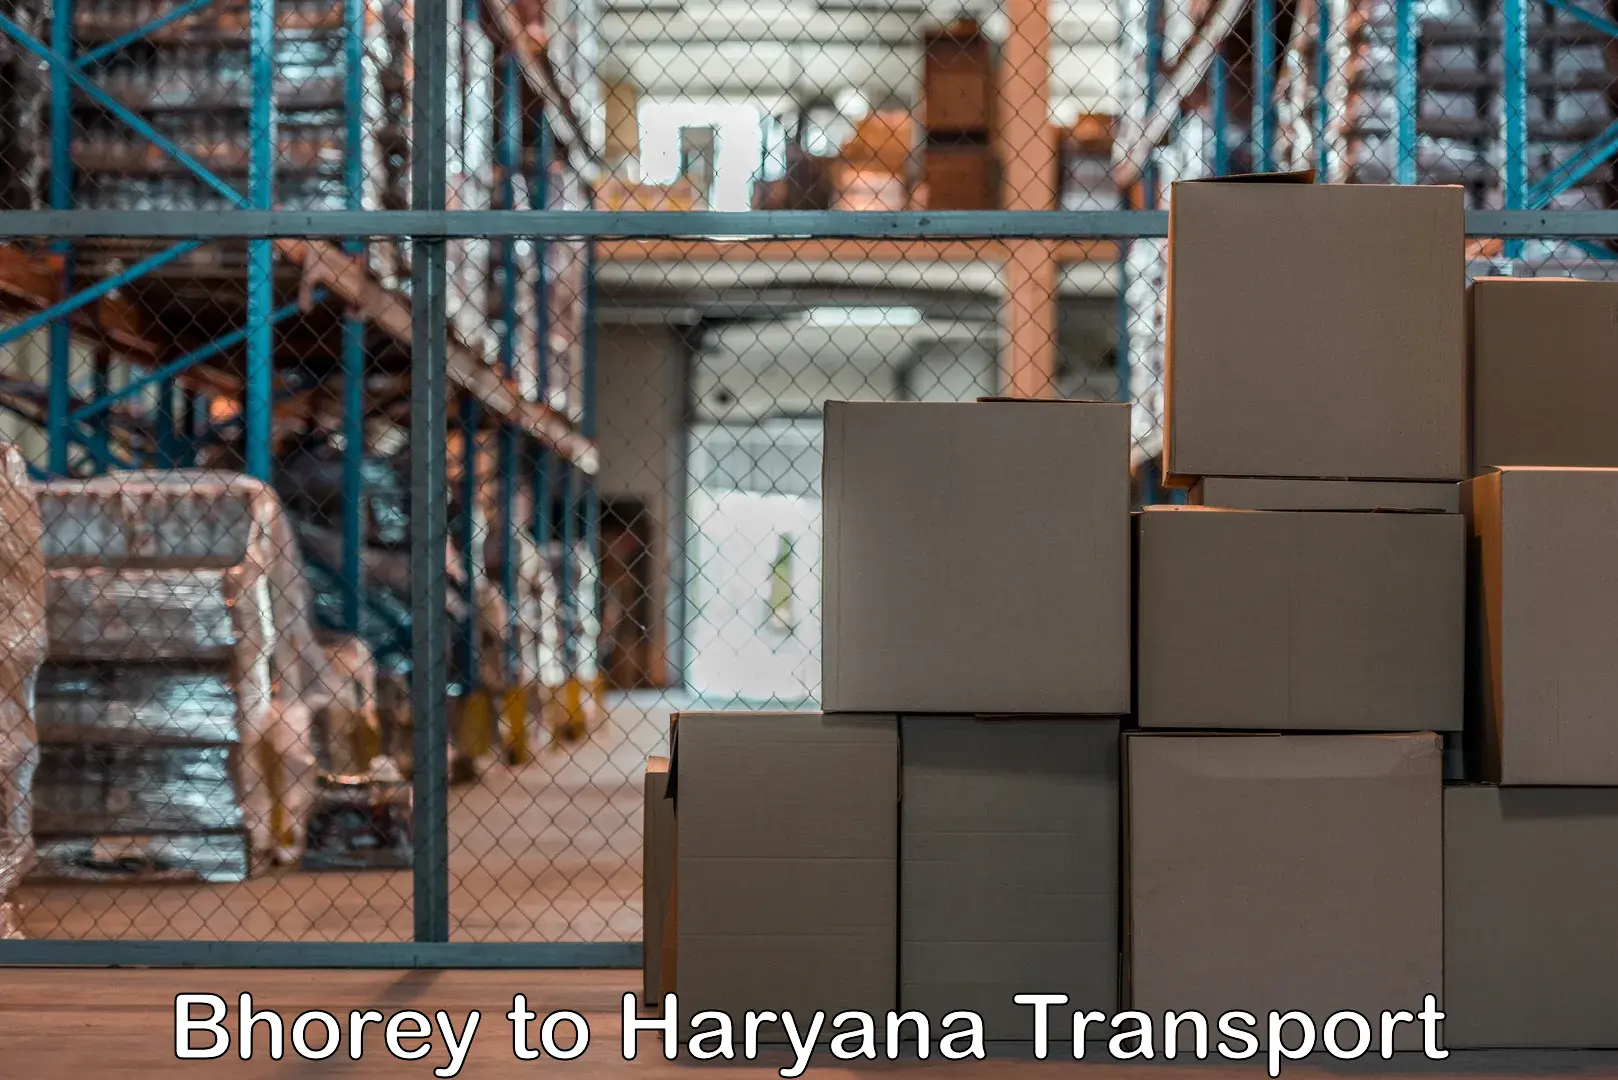 Daily parcel service transport Bhorey to Panipat